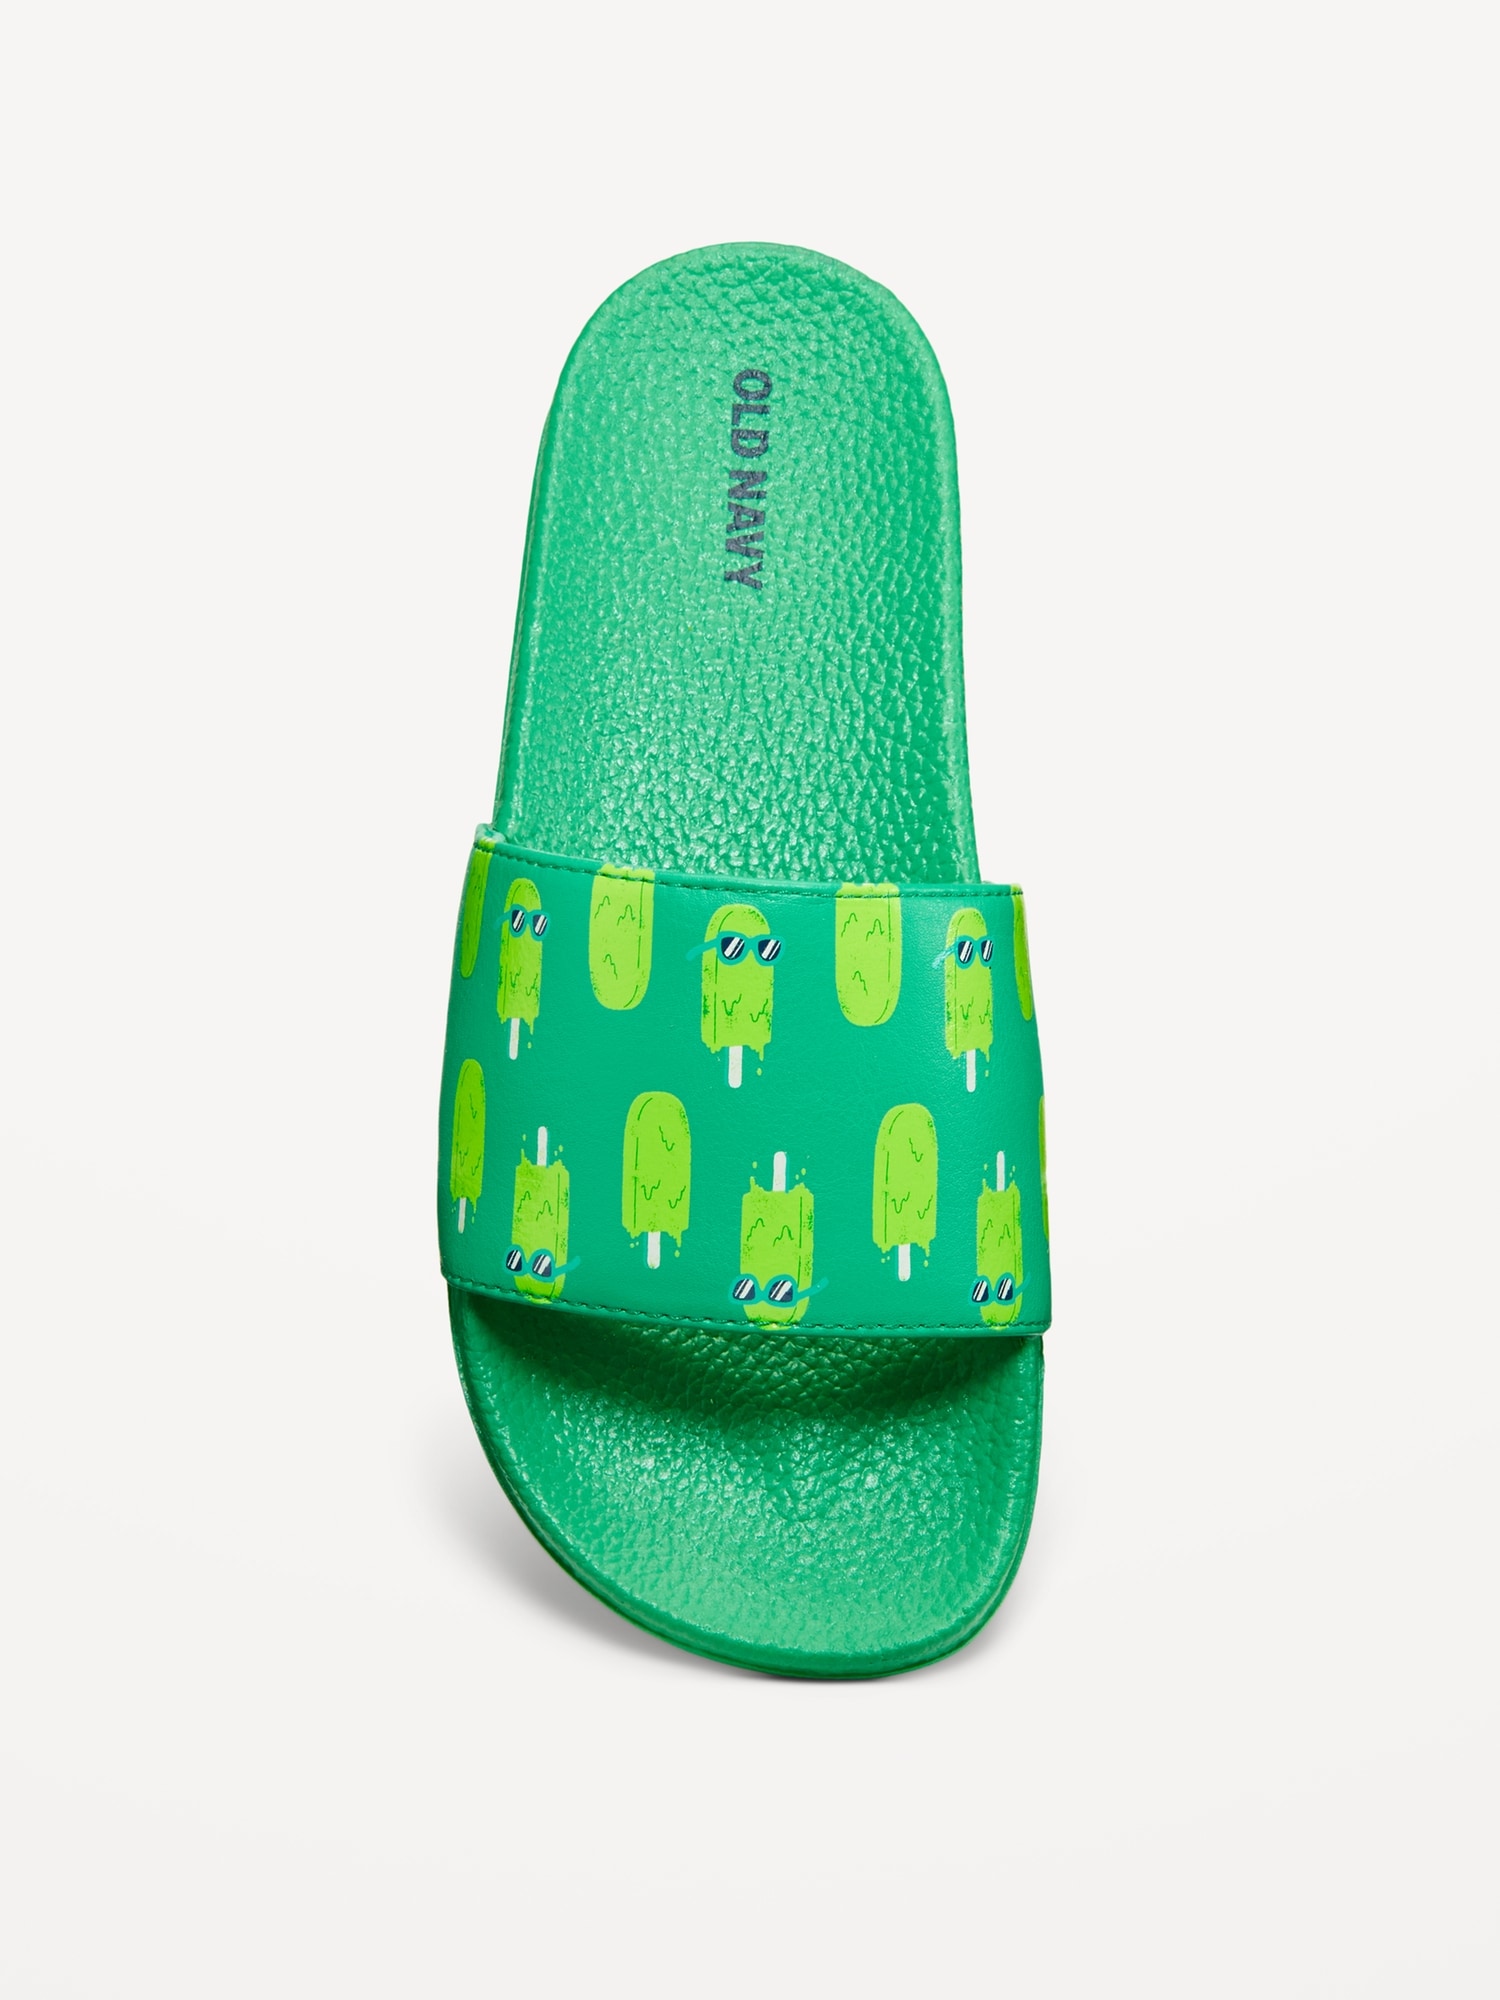 Printed Faux-Leather Pool Slide Sandals for Boys